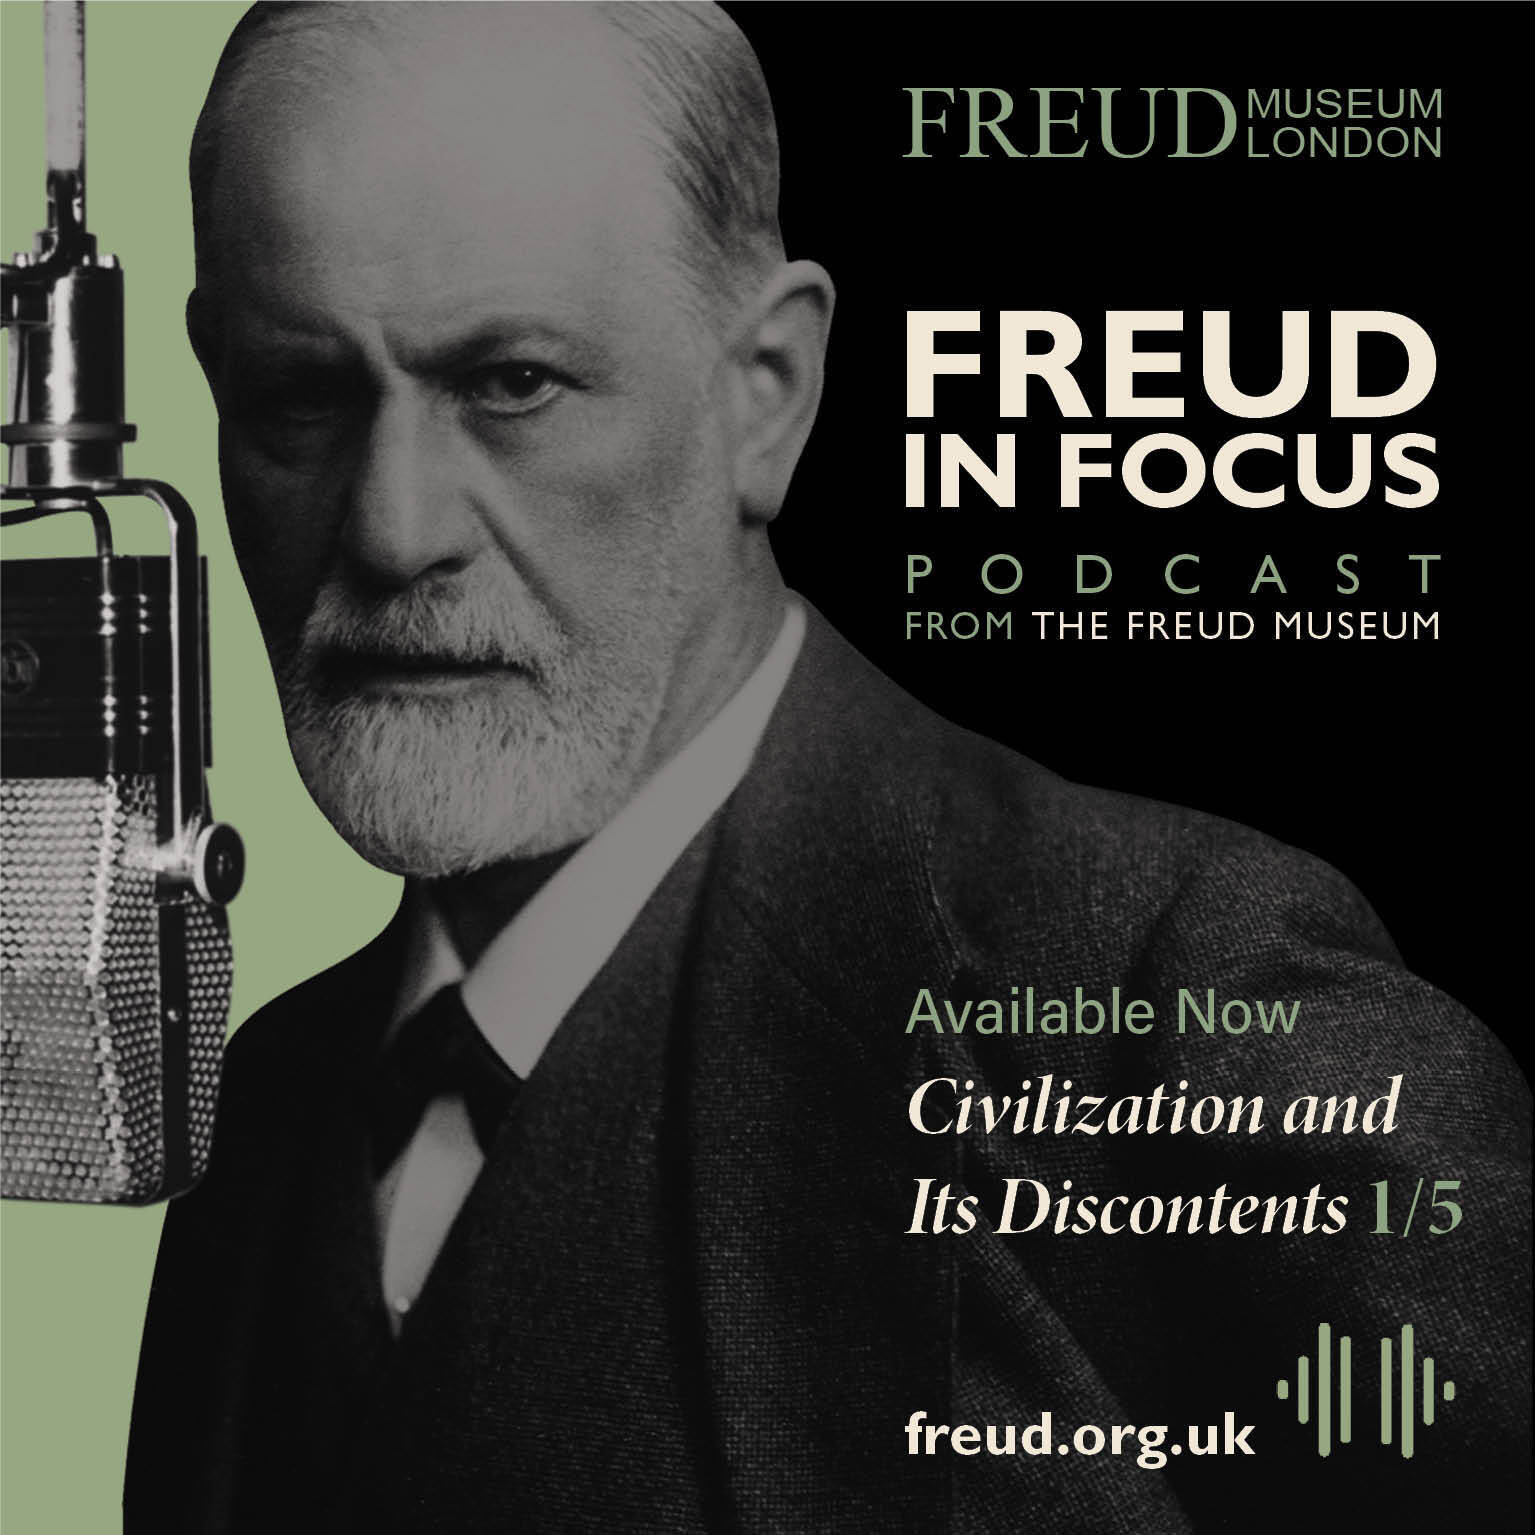 Freud in Focus Podcast - Civilization and Its Discontents